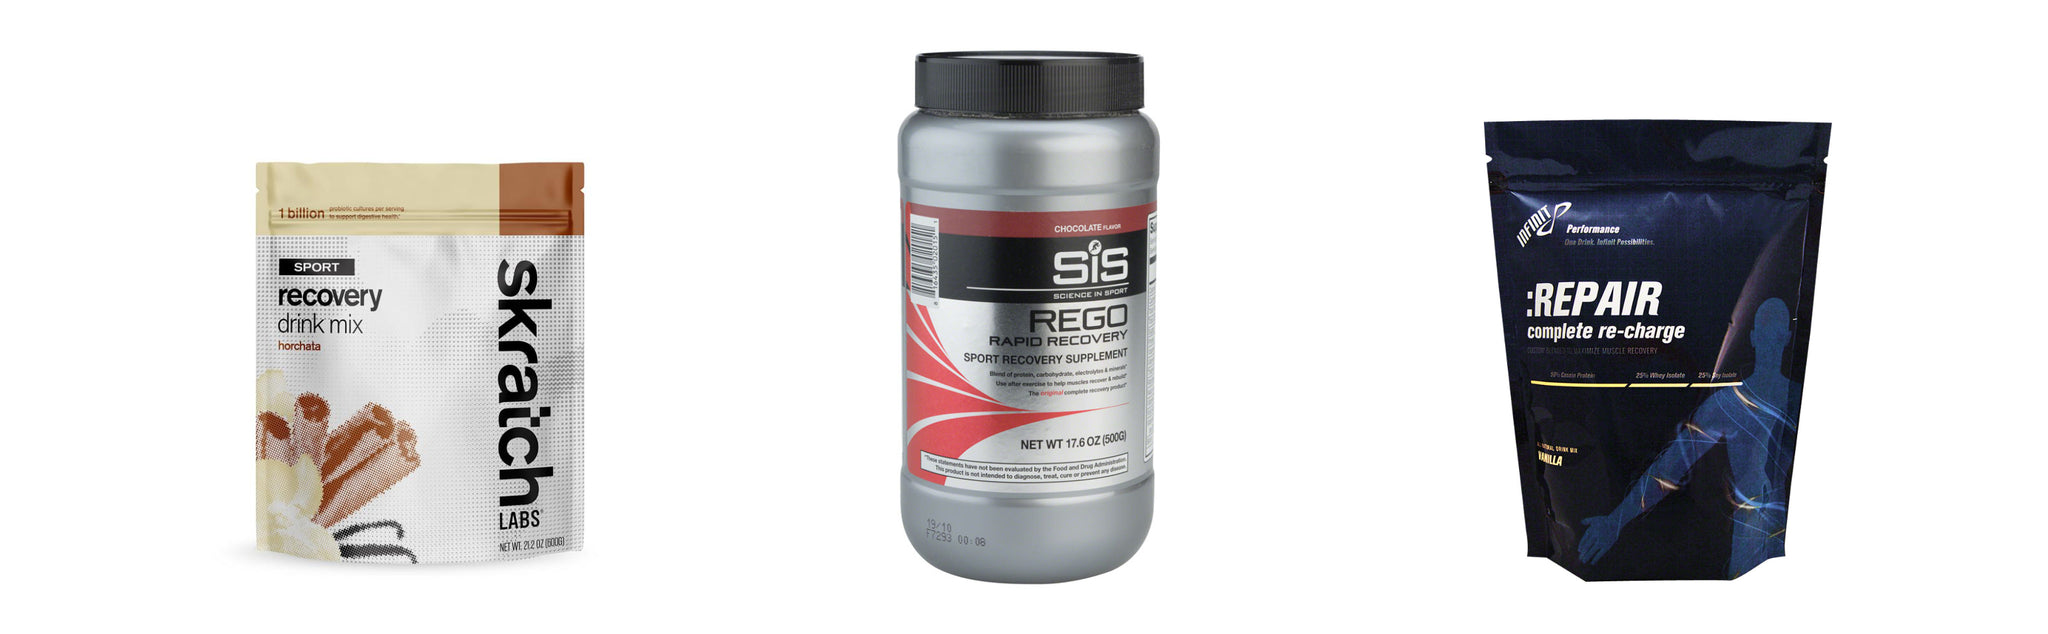 Best cycling recovery shake drink mix